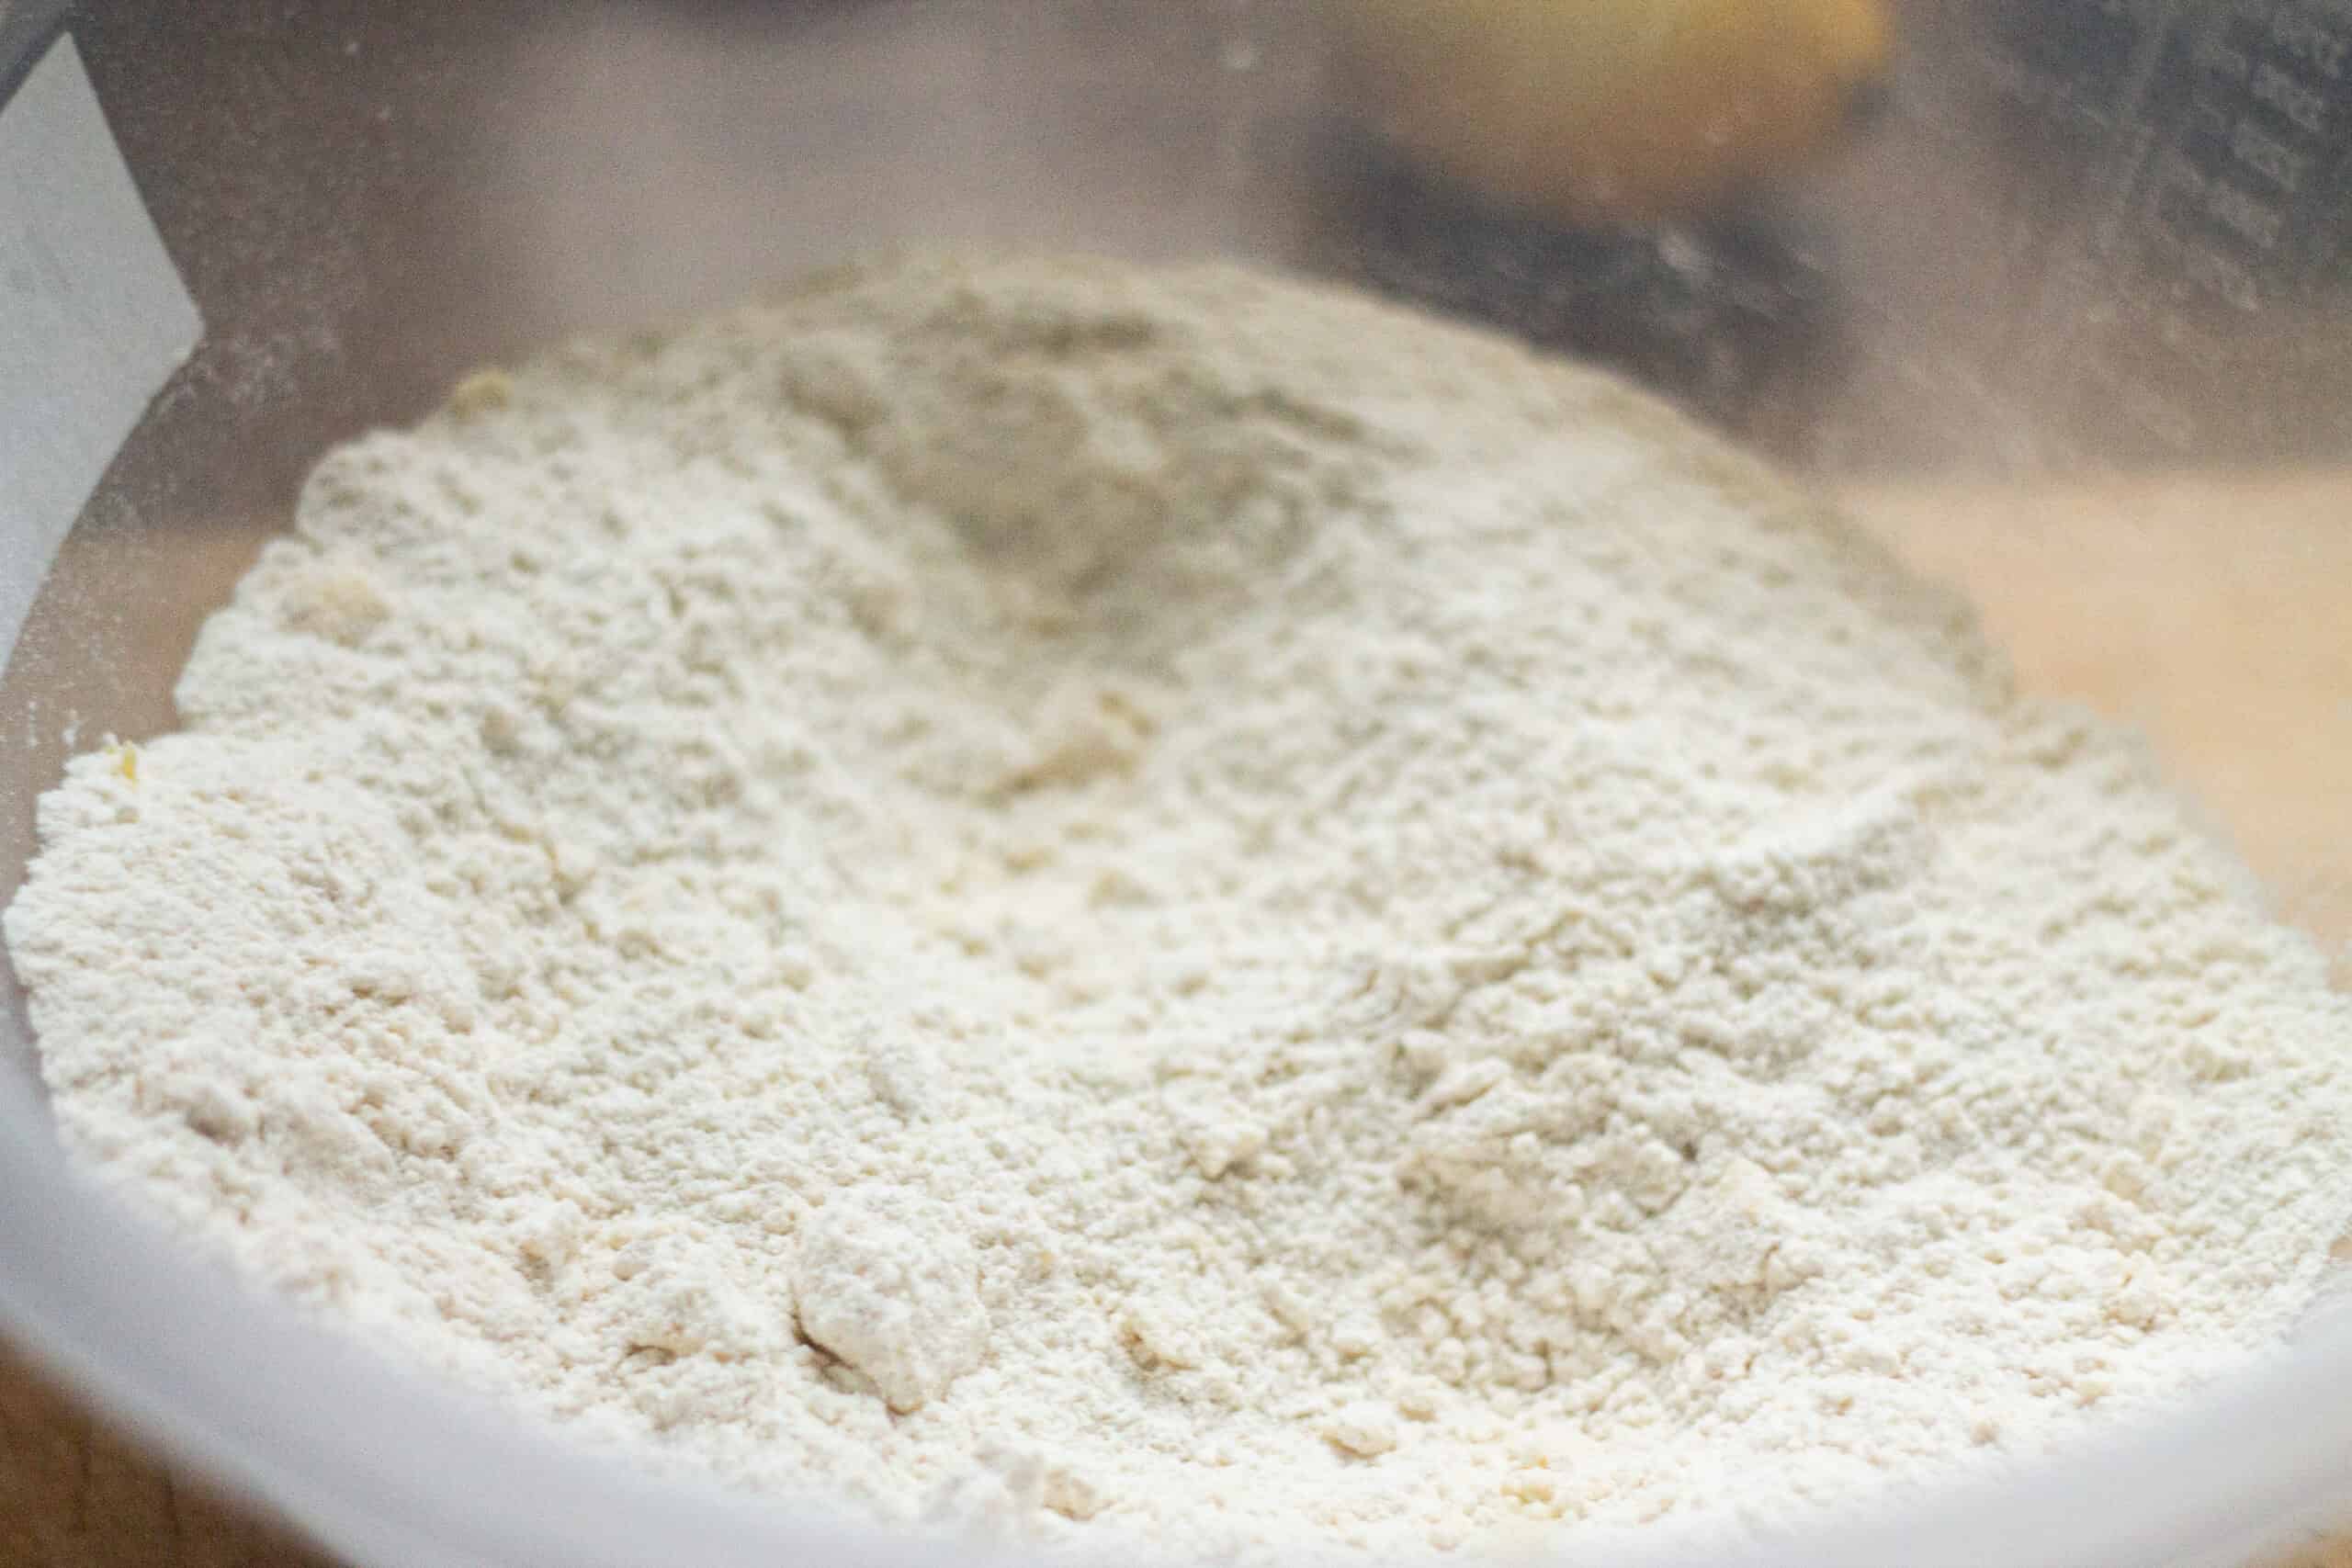 Margarine rubbed into flour